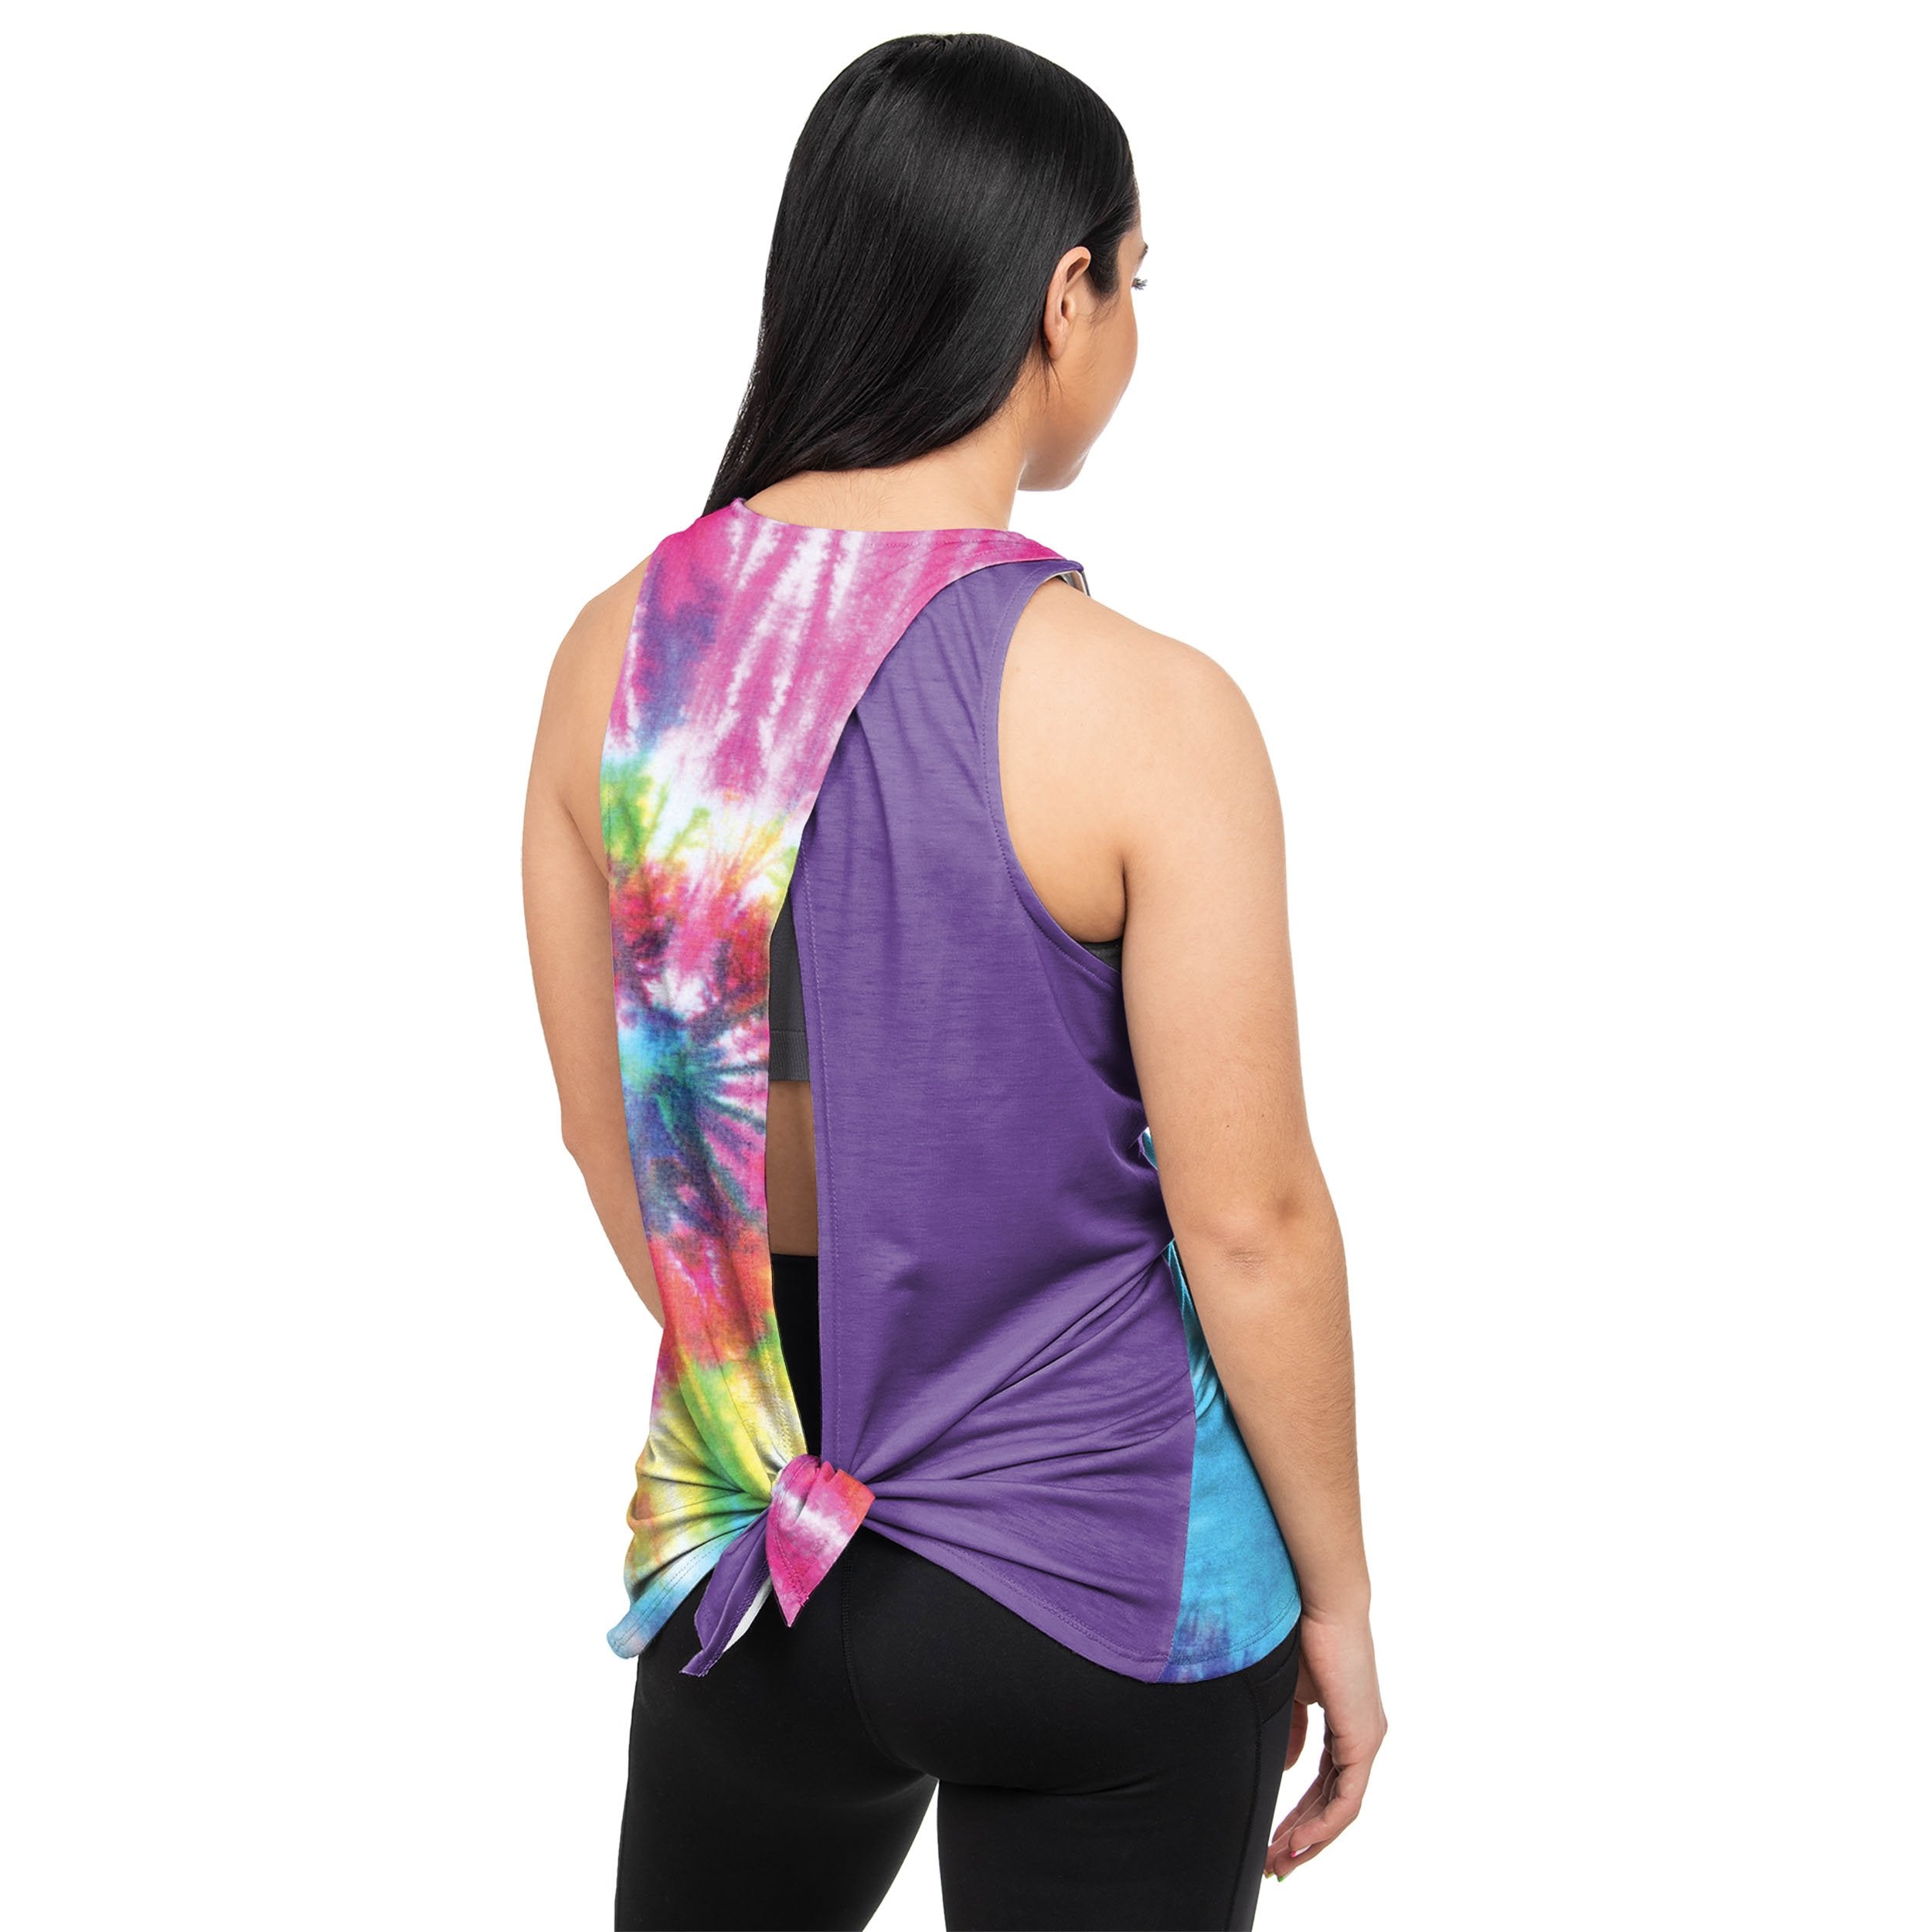 FOCO Miami Marlins Womens Burn Out Sleeveless Top, Size: 2XL